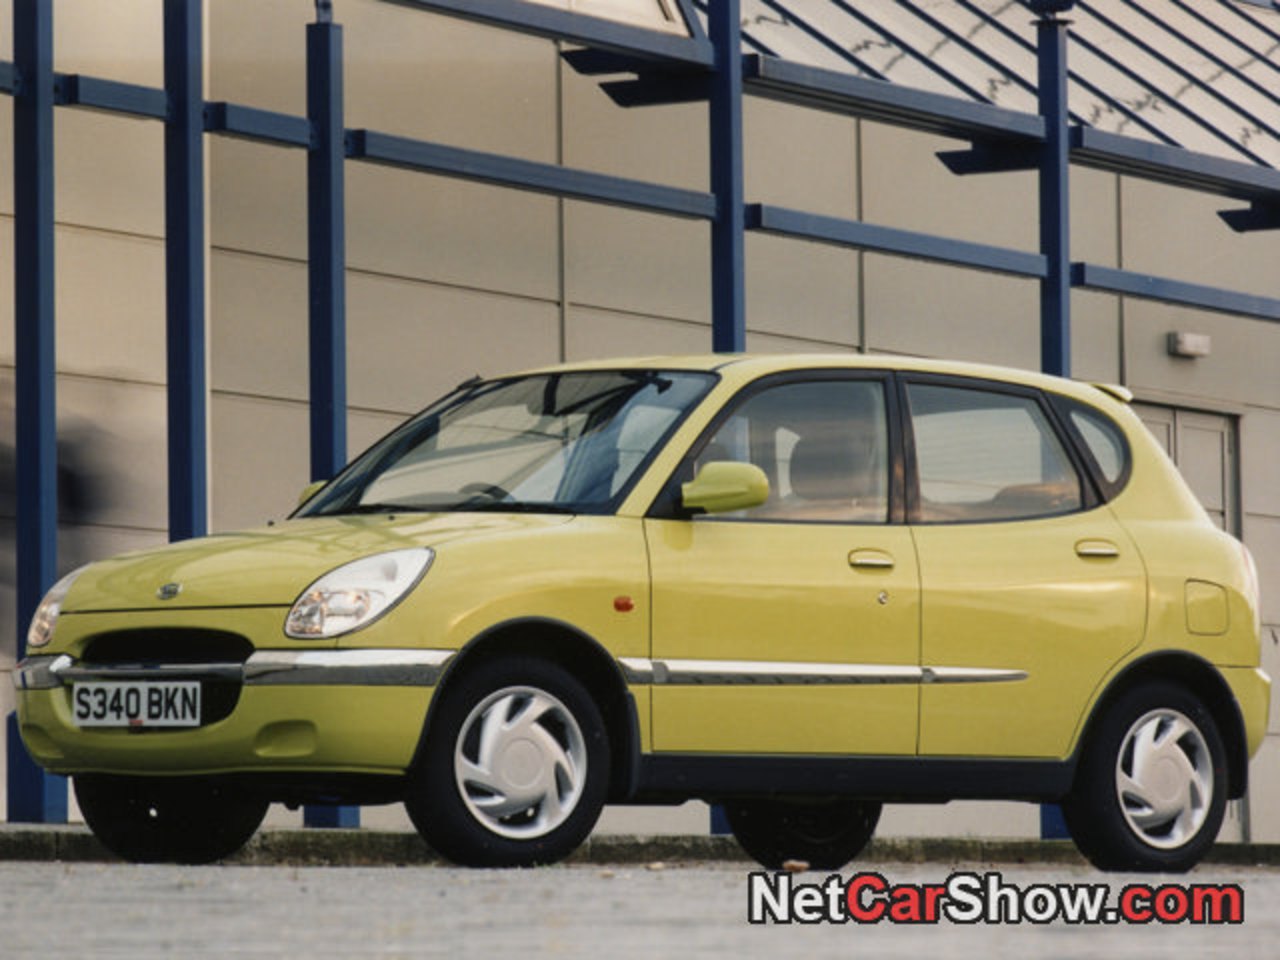 Daihatsu Sirion picture # 07 of 17, Front Angle, MY 1999, 1280x960